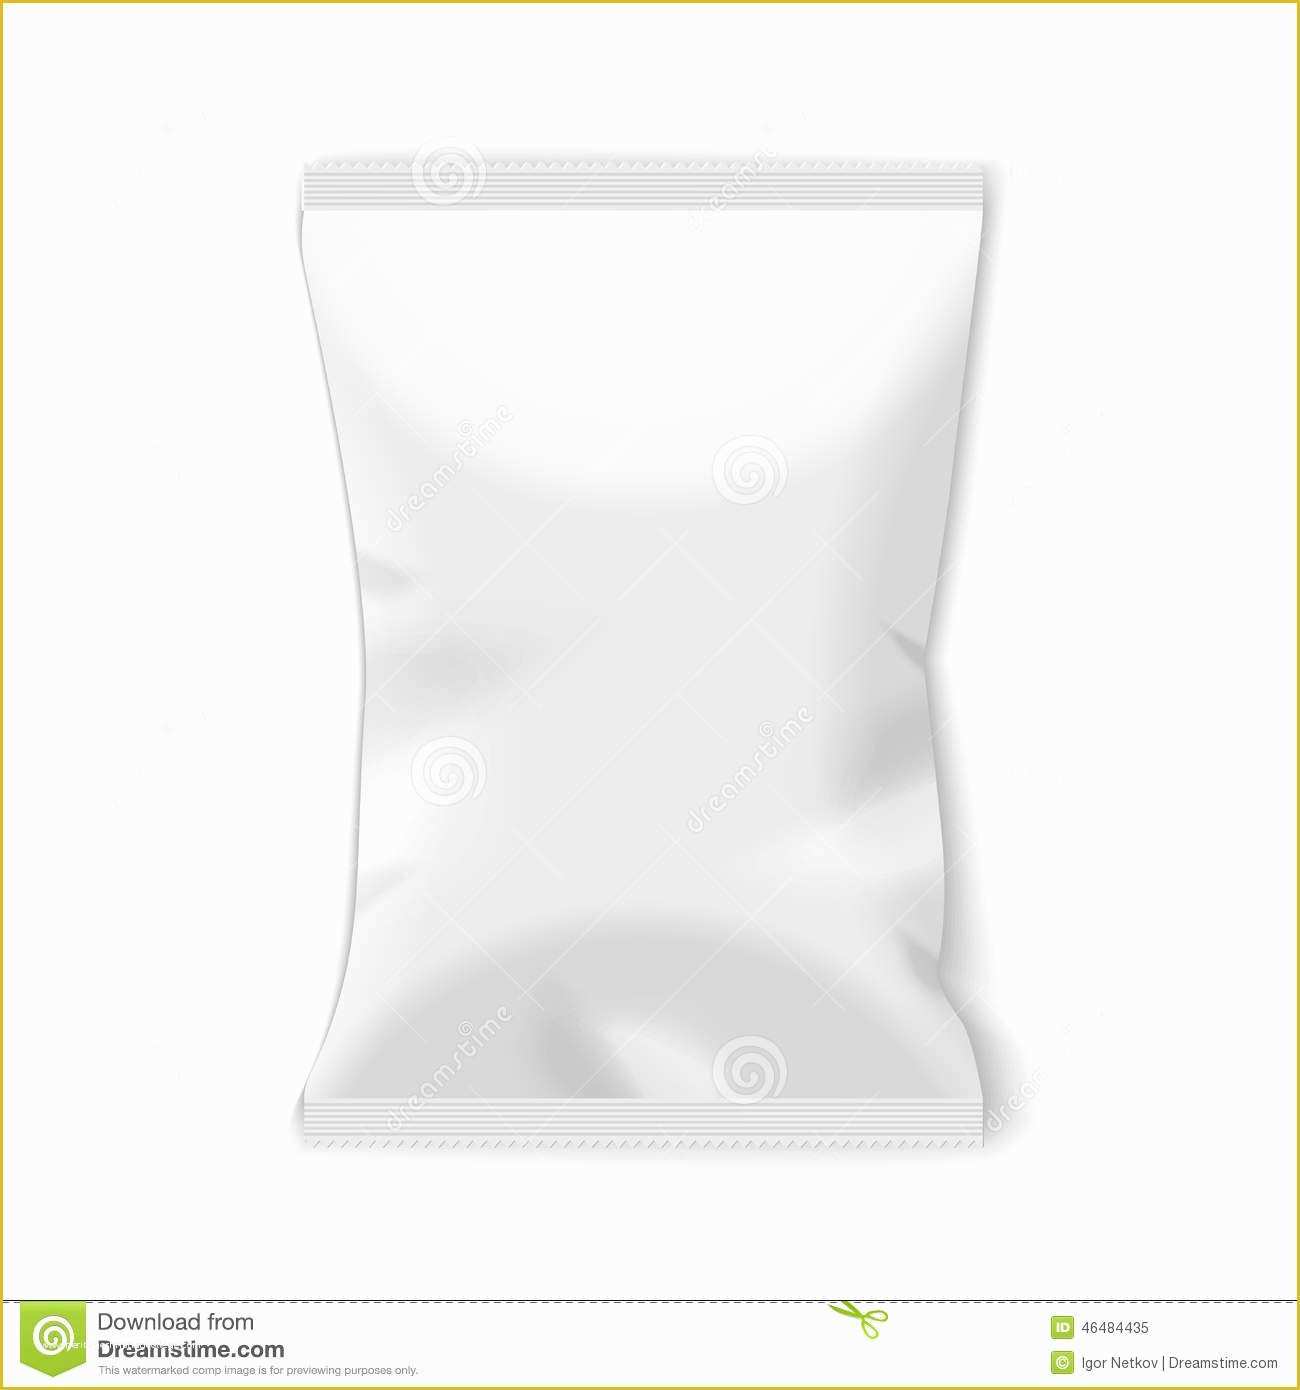 Free Potato Chip Bag Template Of Potato Chips Plastic Packaging Stock Vector Image